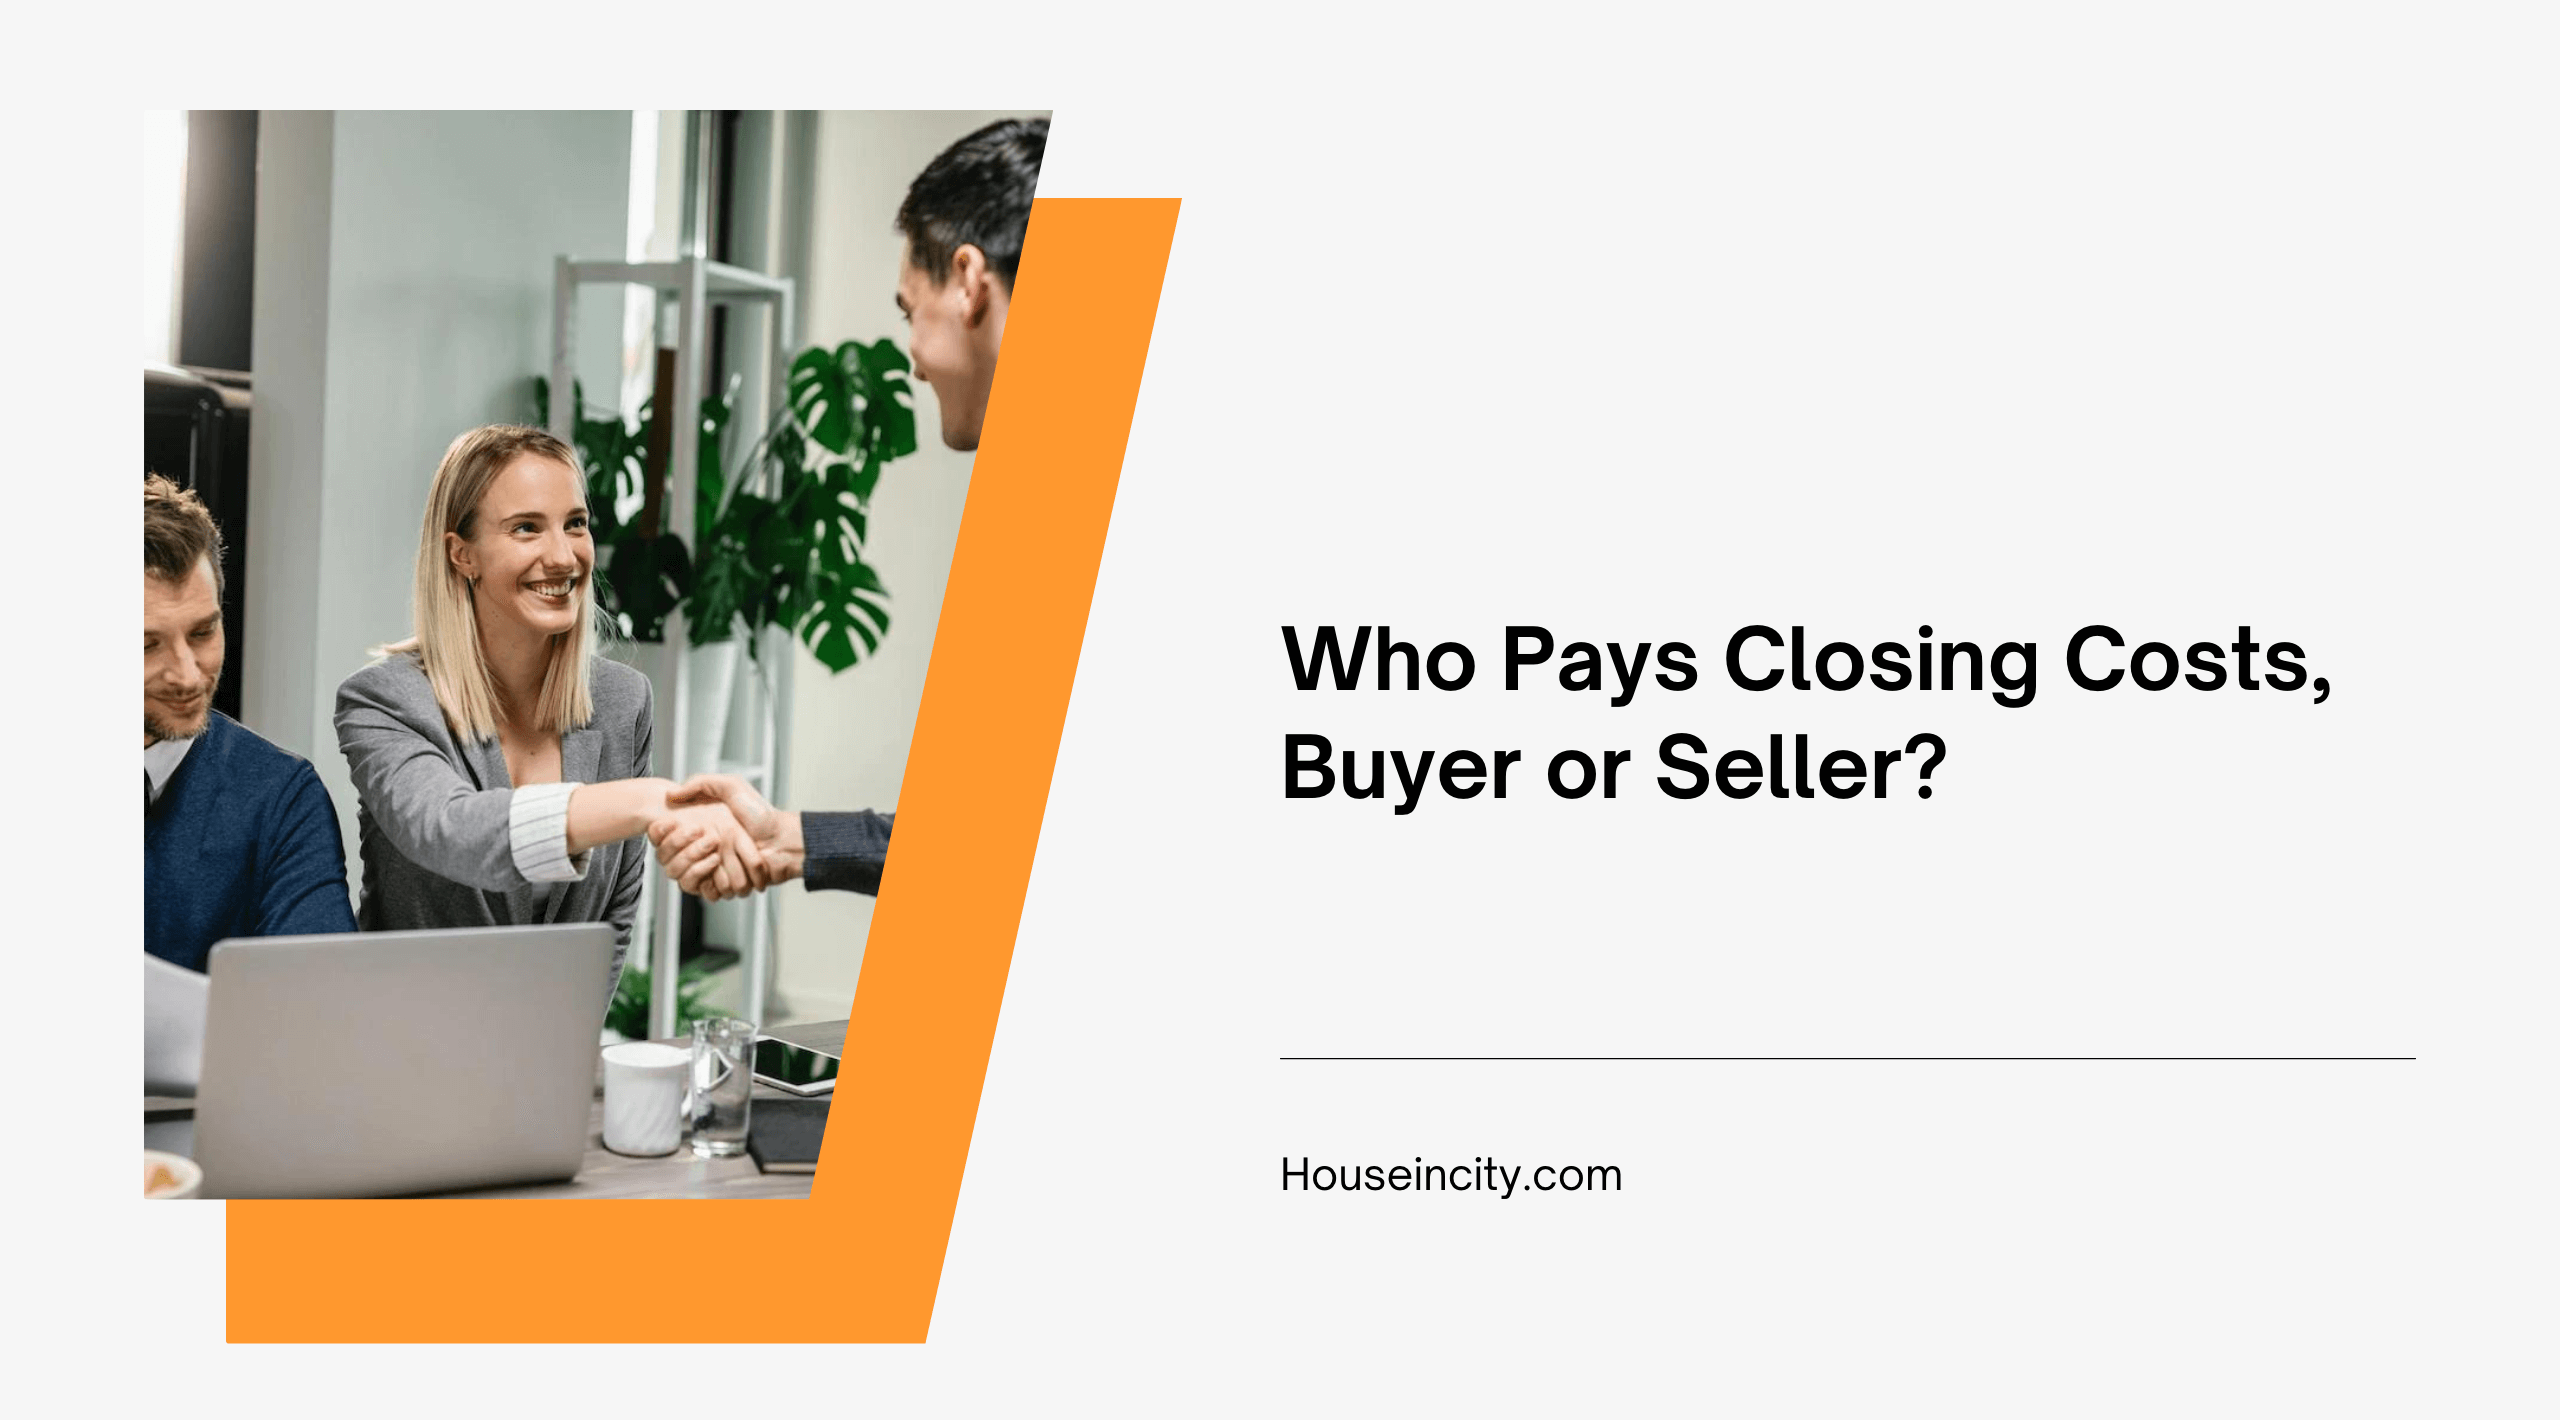 Who Pays Closing Costs, Buyer or Seller?